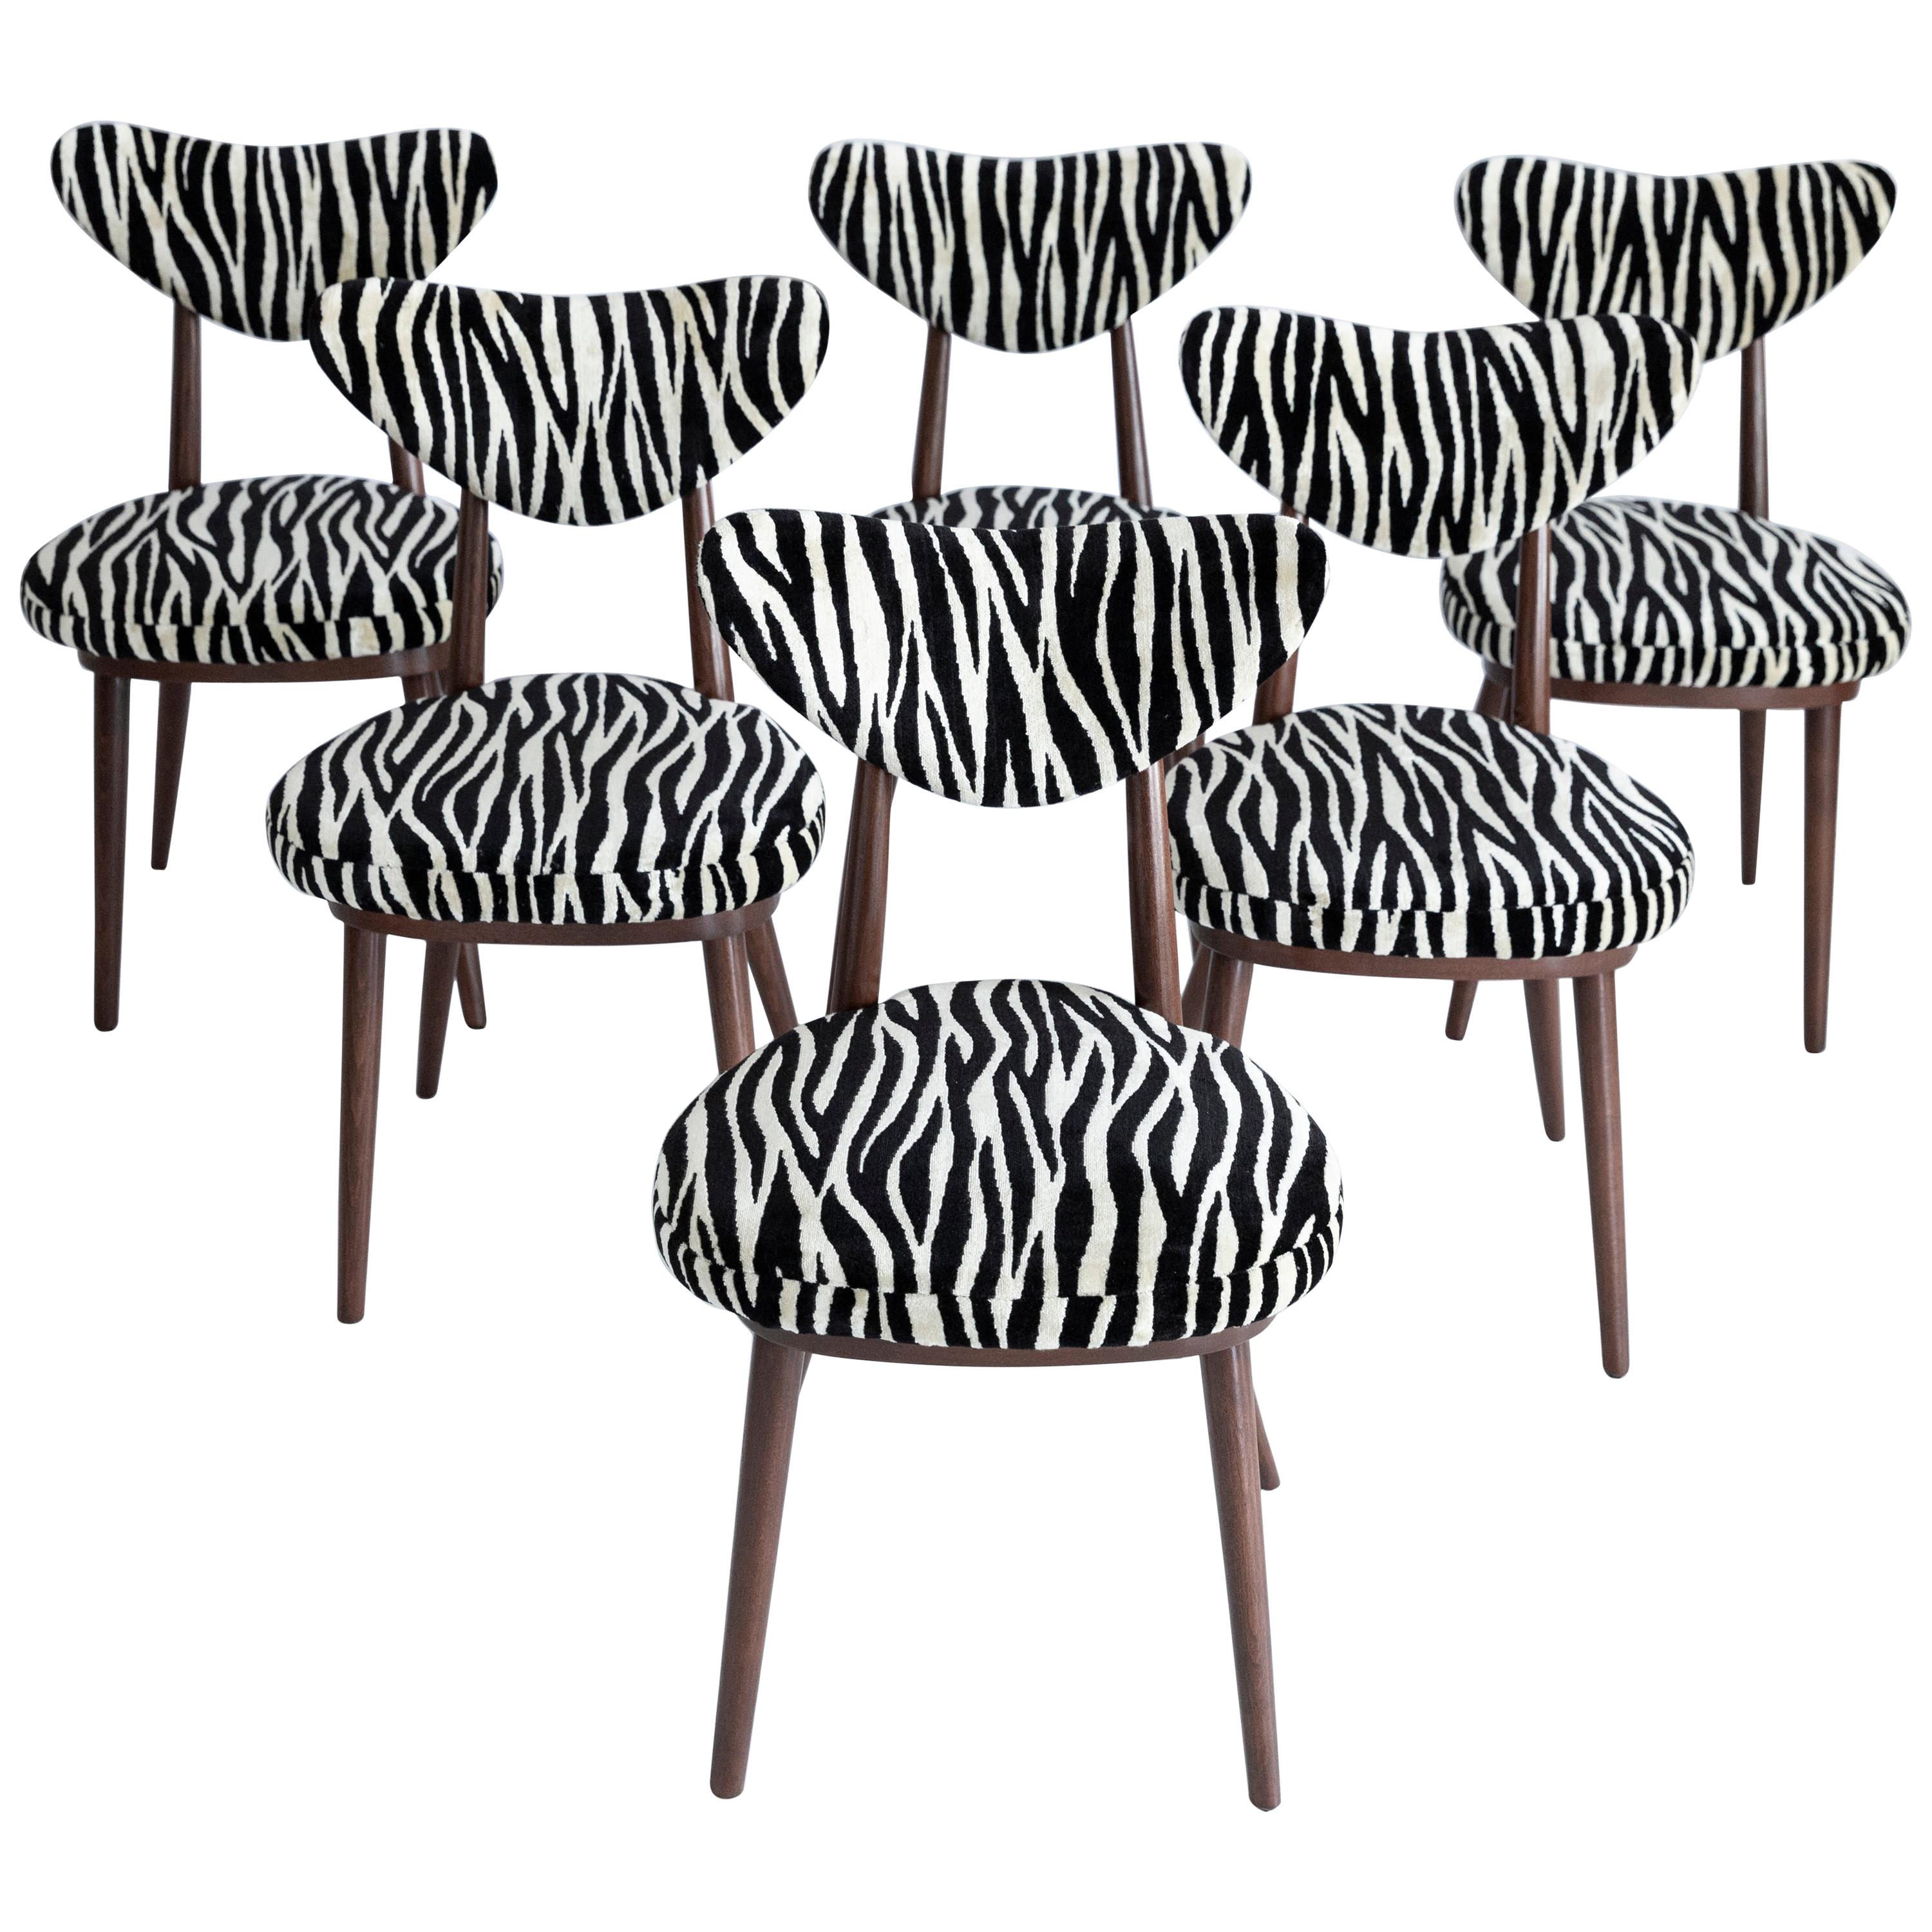 Set of Six Midcentury Zebra Black and White Heart Chairs, Poland, 1960s For Sale